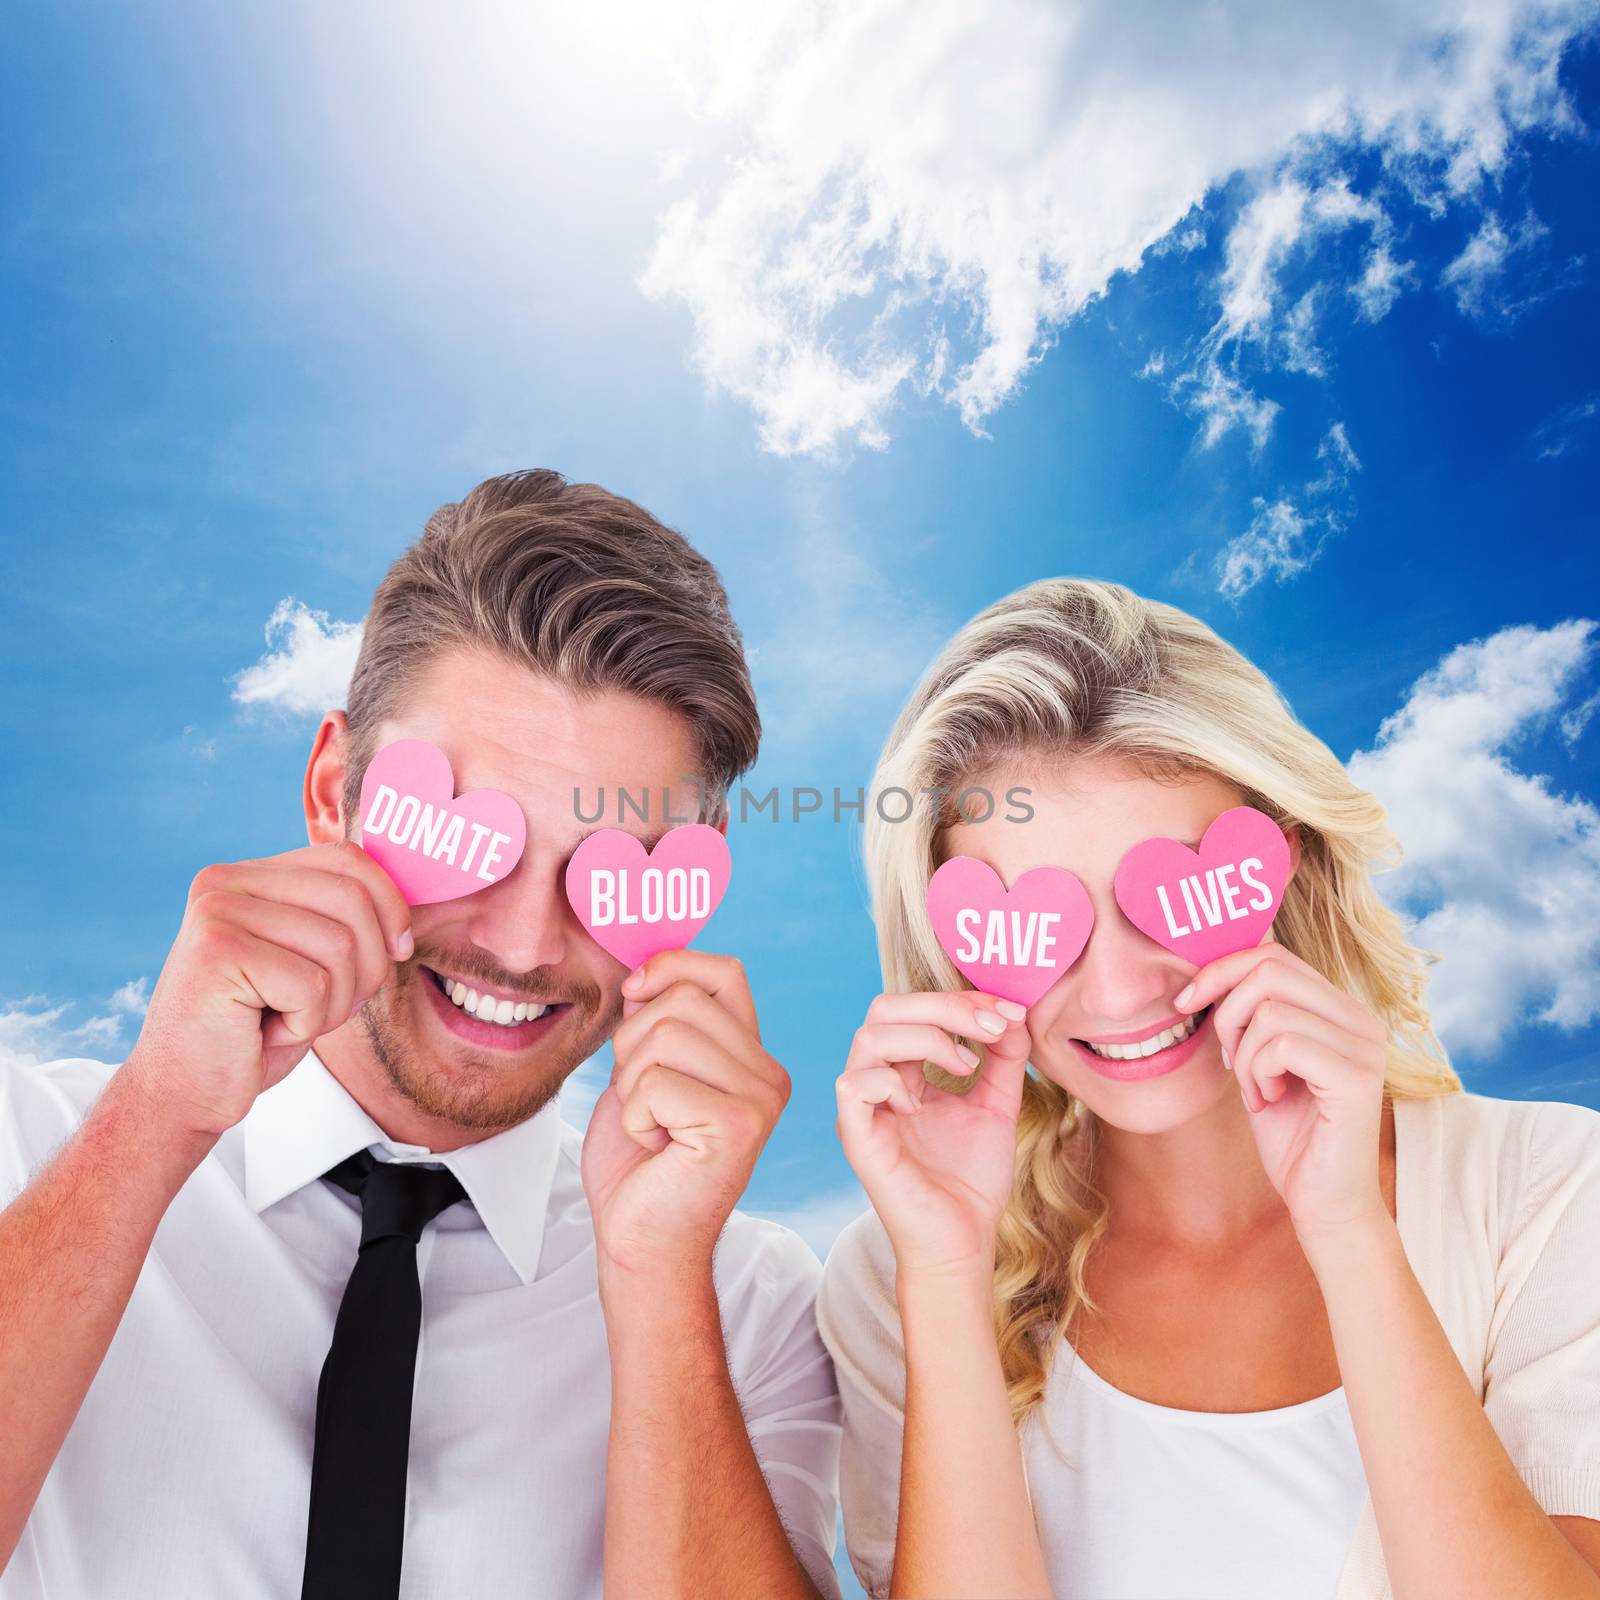 Attractive young couple holding pink hearts over eyes against blue sky